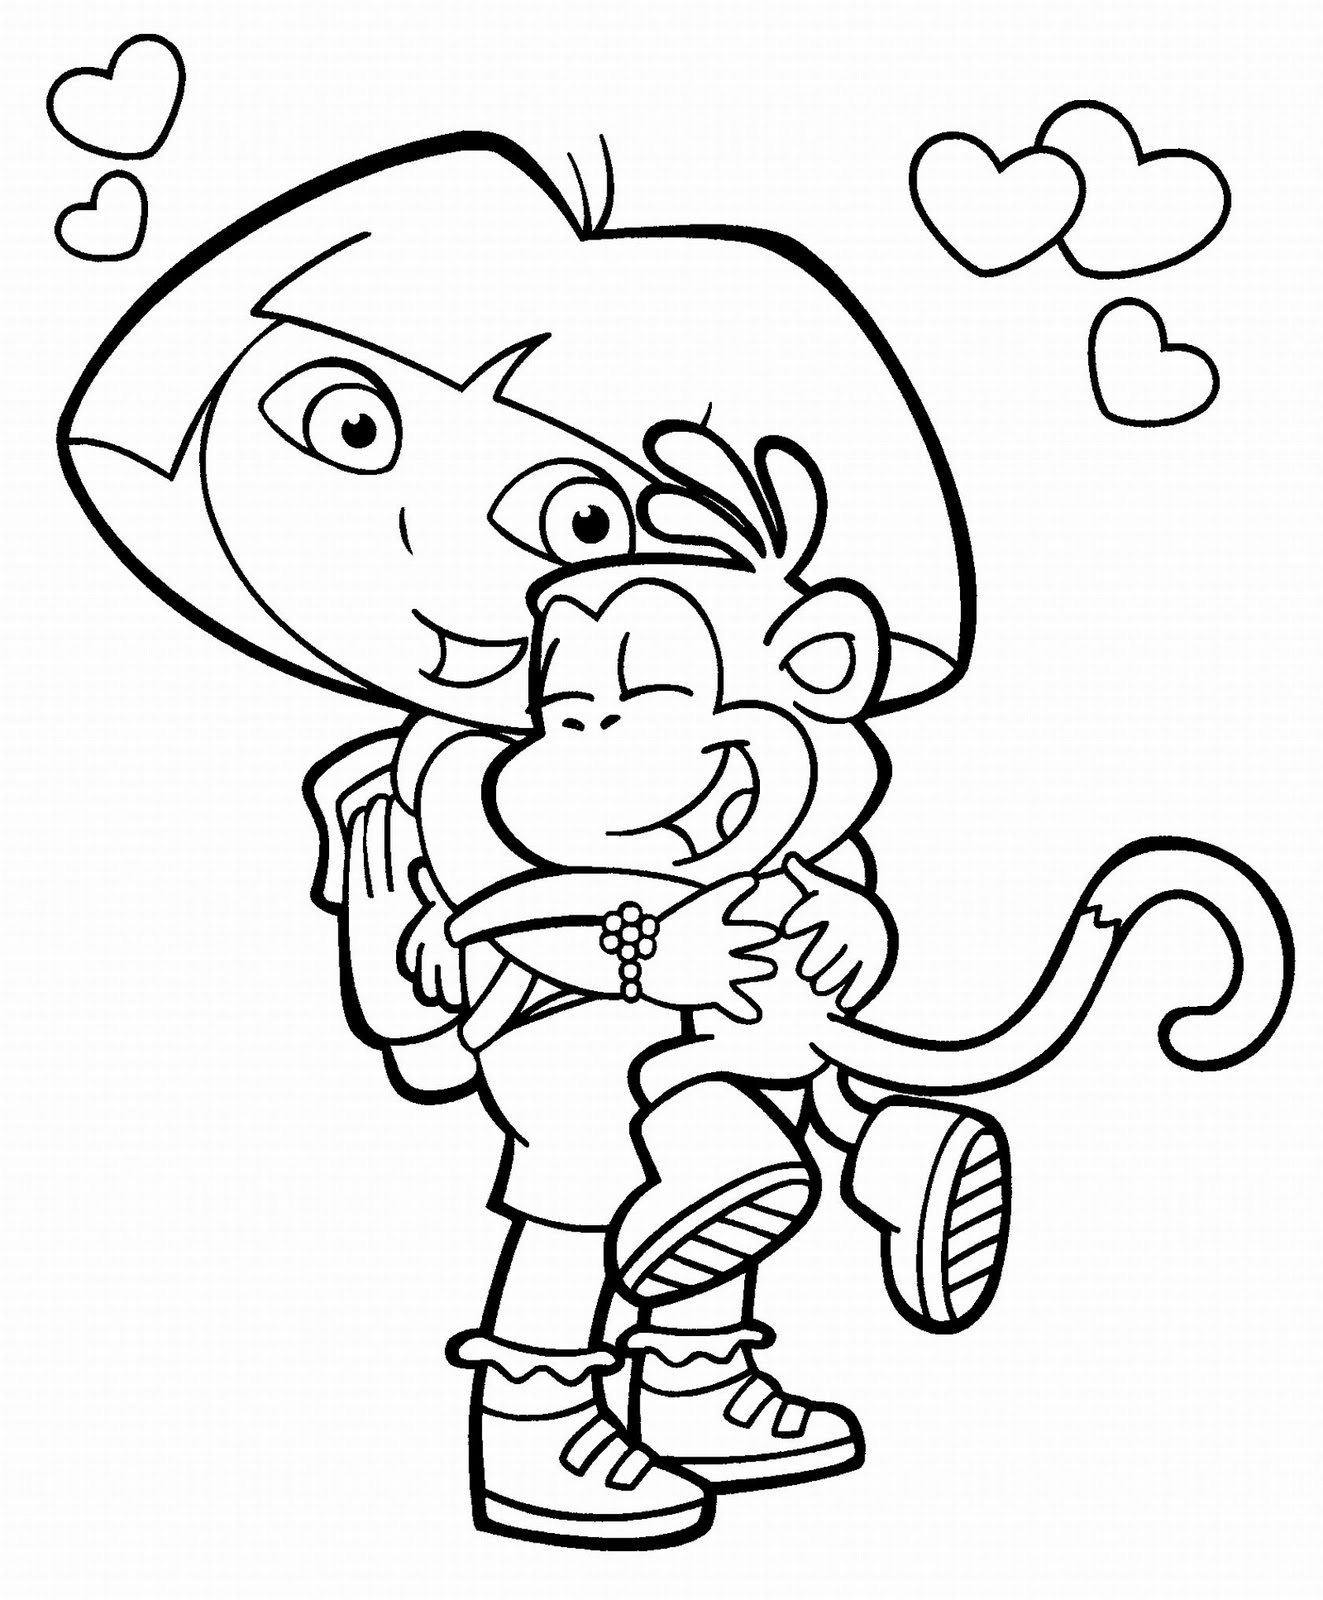 Dora Printable Coloring Pages 8